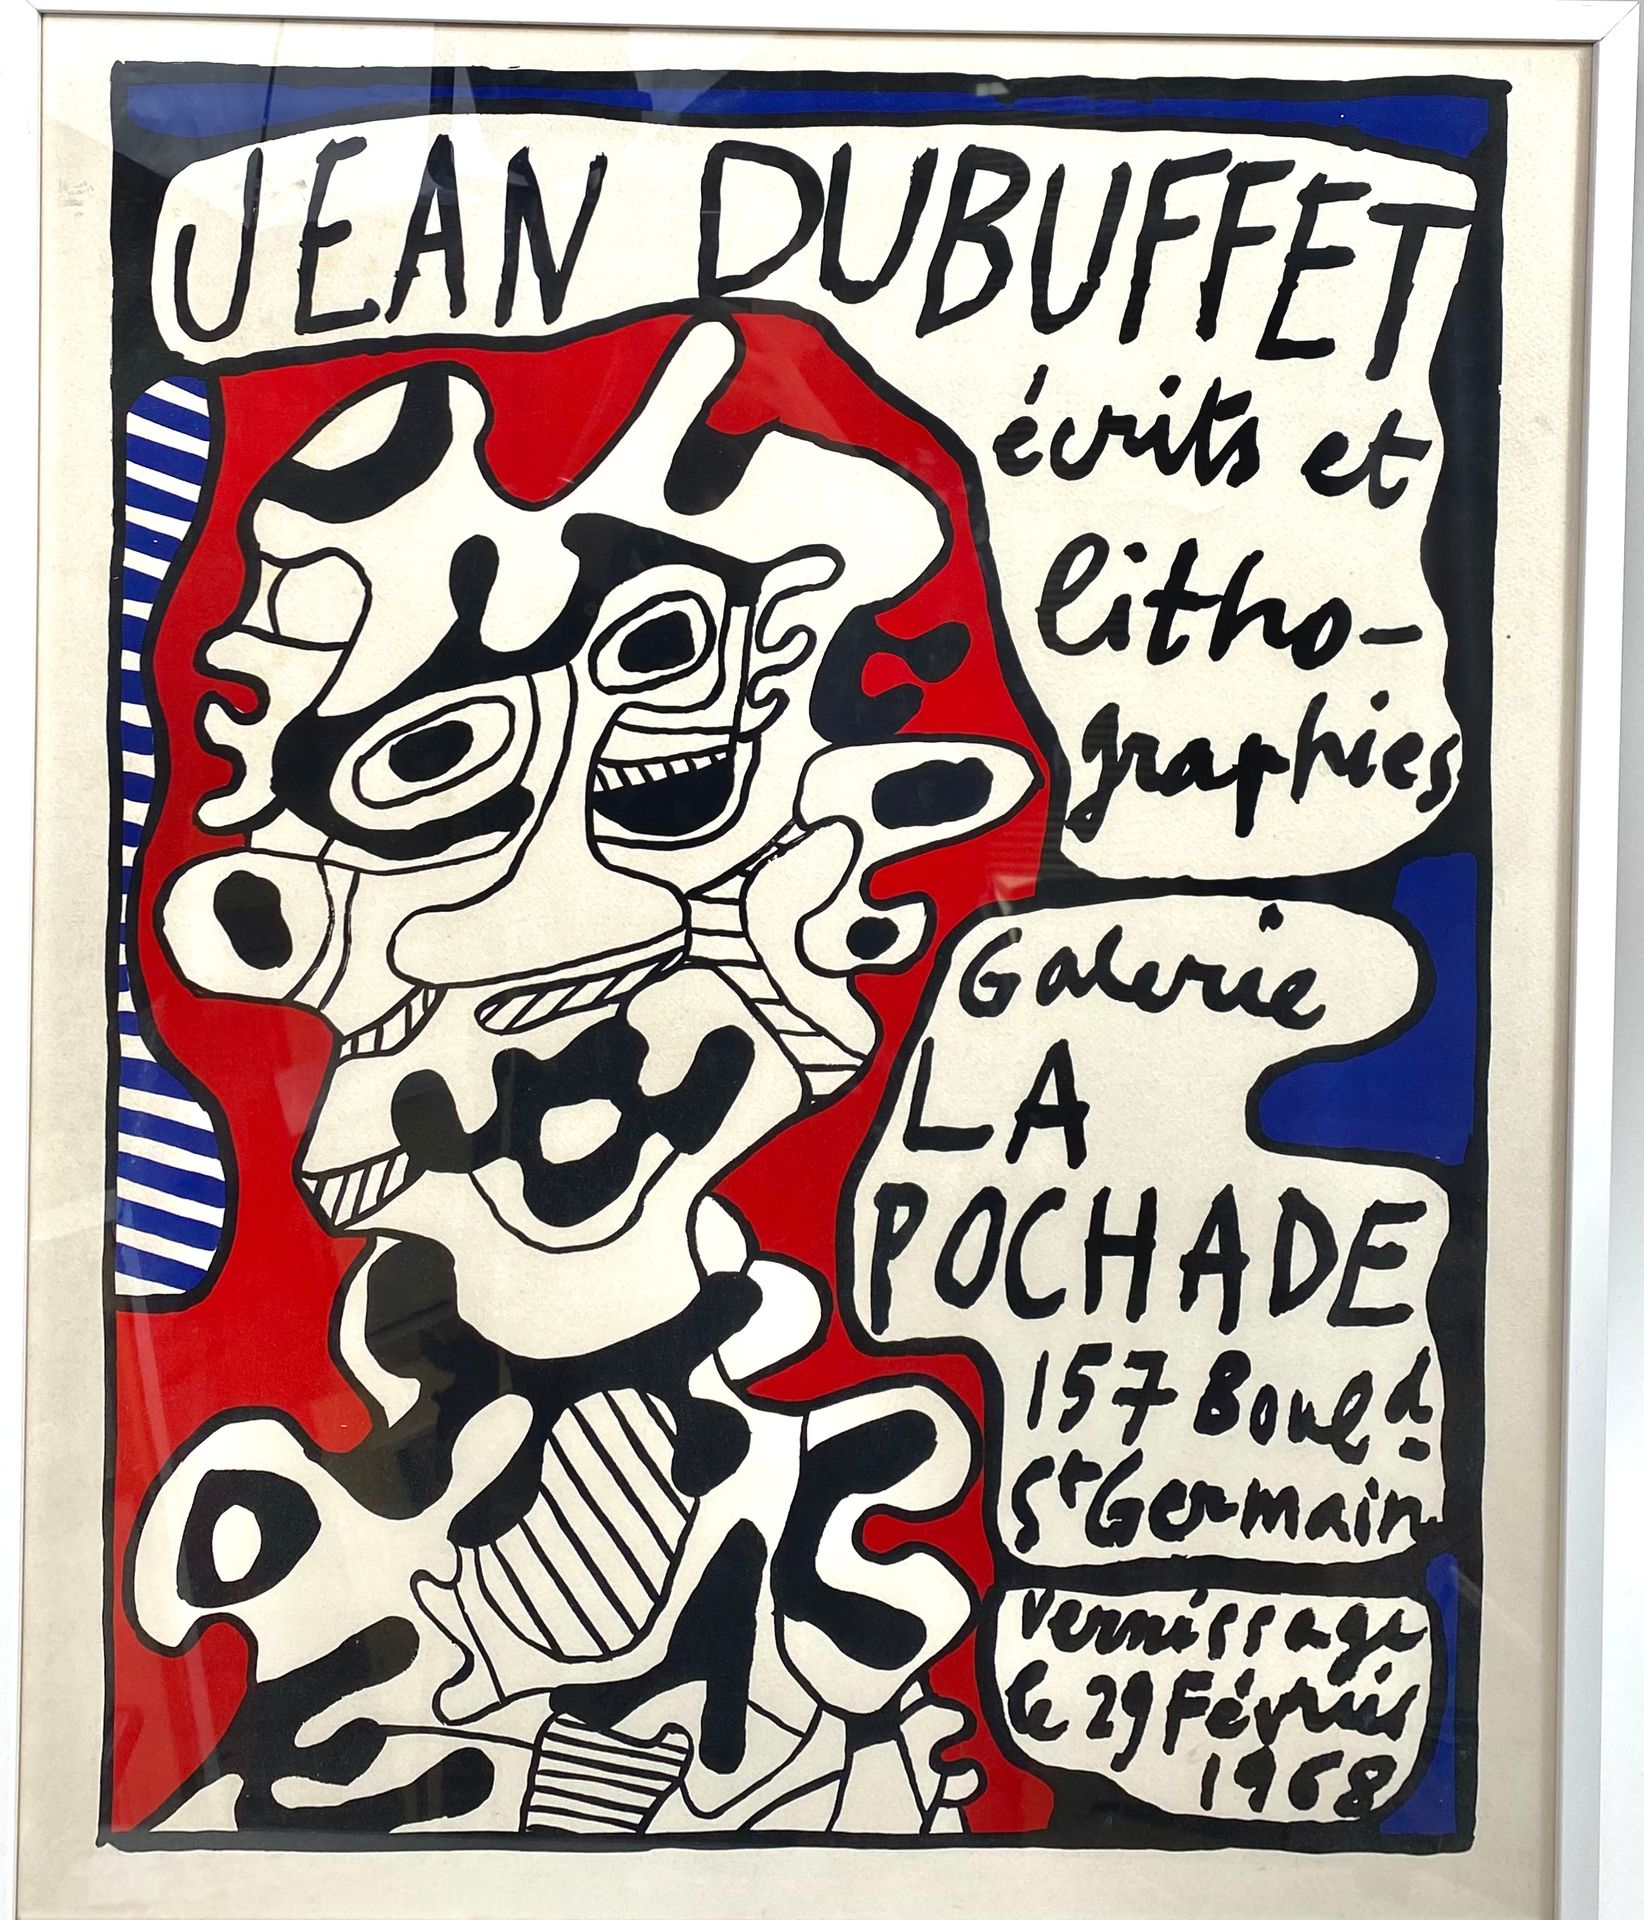 Null Jean DUBUFFET (1901-1985)

Writings and Lithographs, Galerie La Pochade, Ap&hellip;